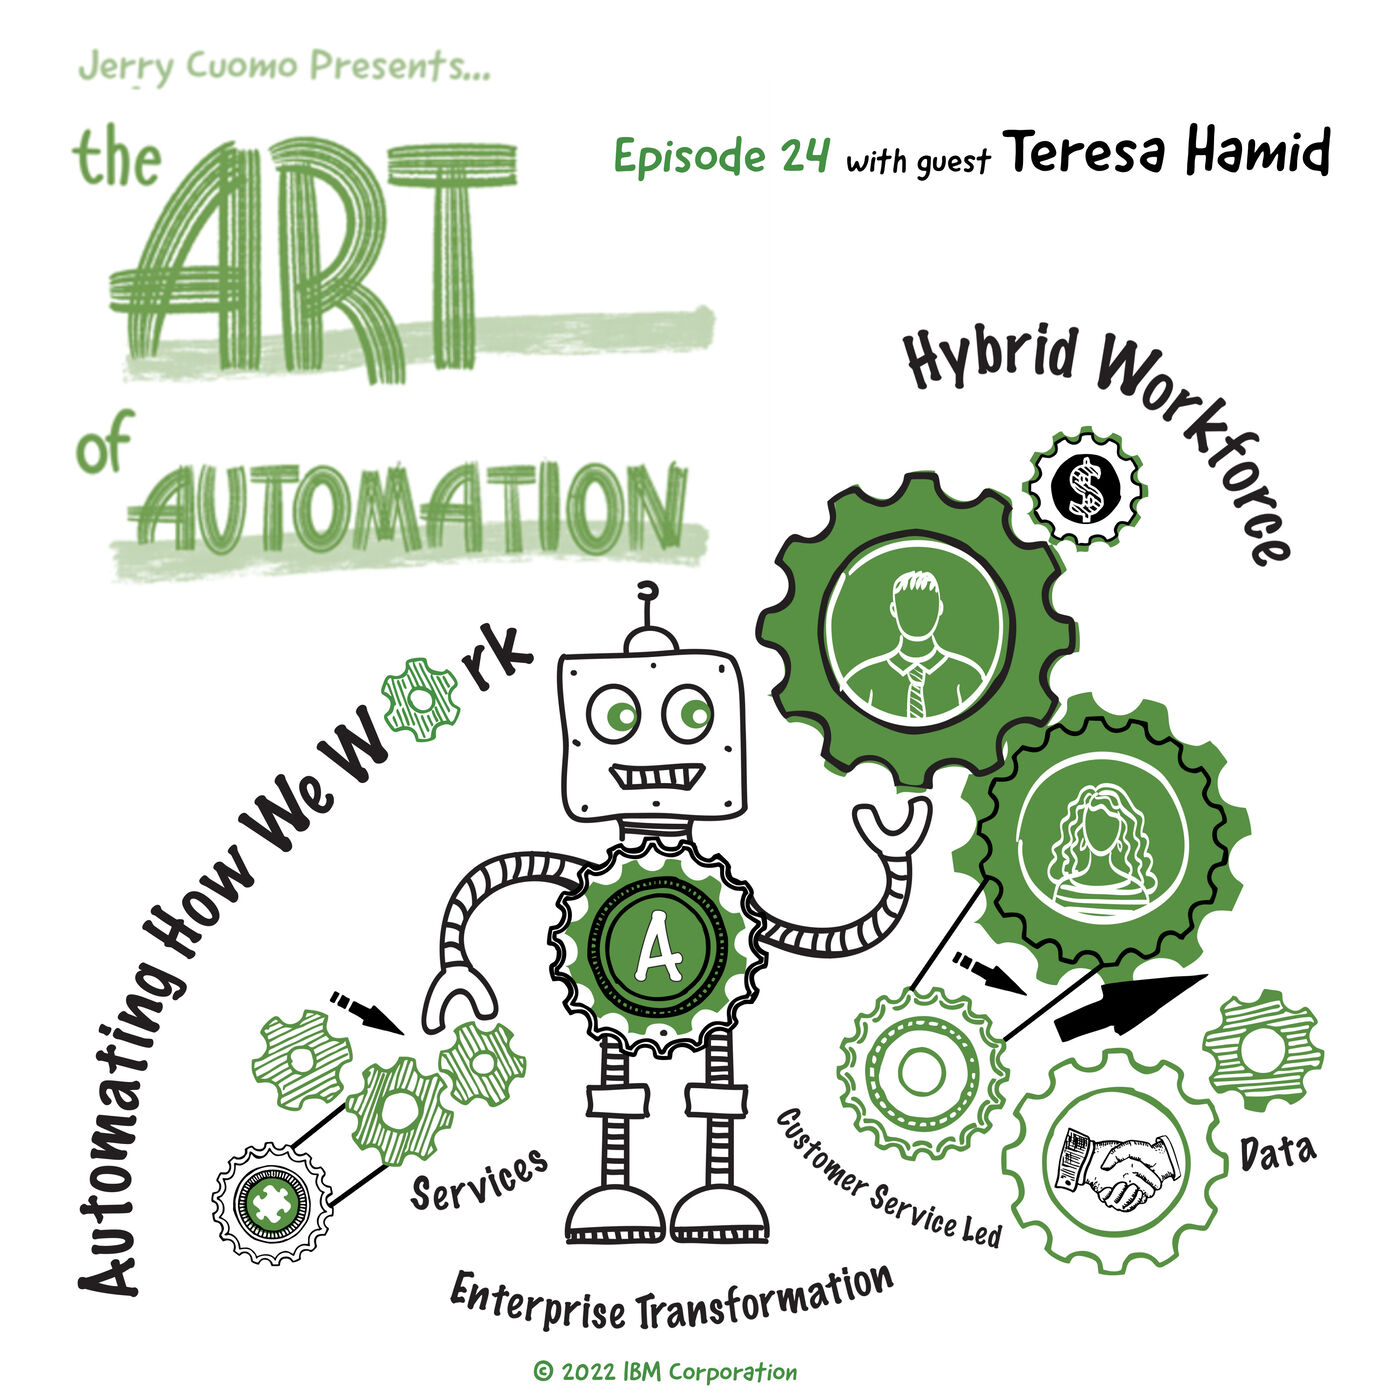 Automating How We Work with Teresa Hamid